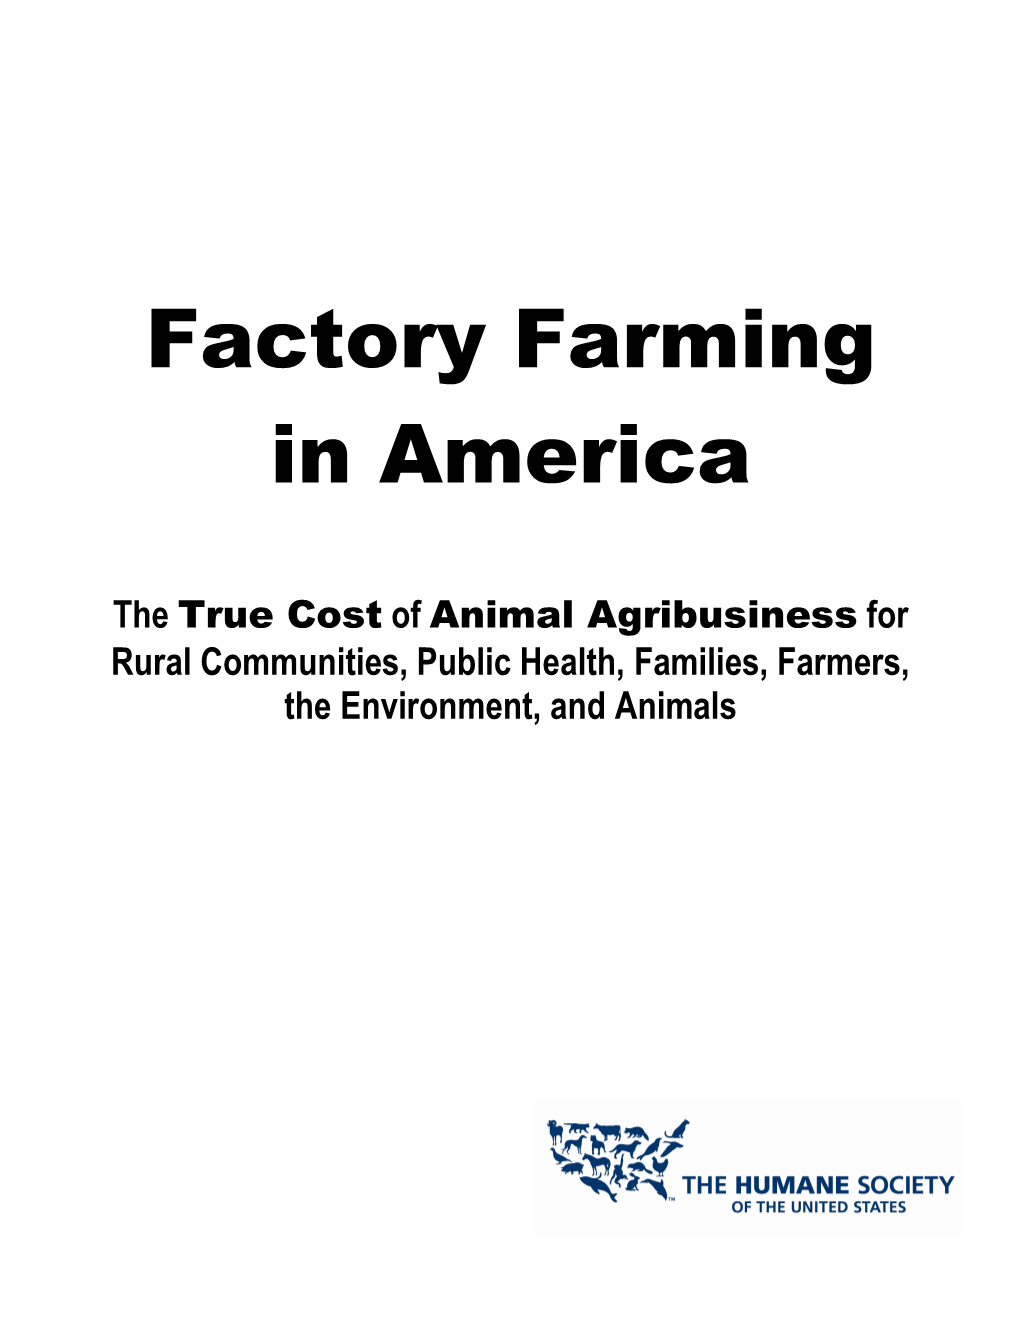 Factory Farming in America: the True Cost of Animal Agribusiness 1